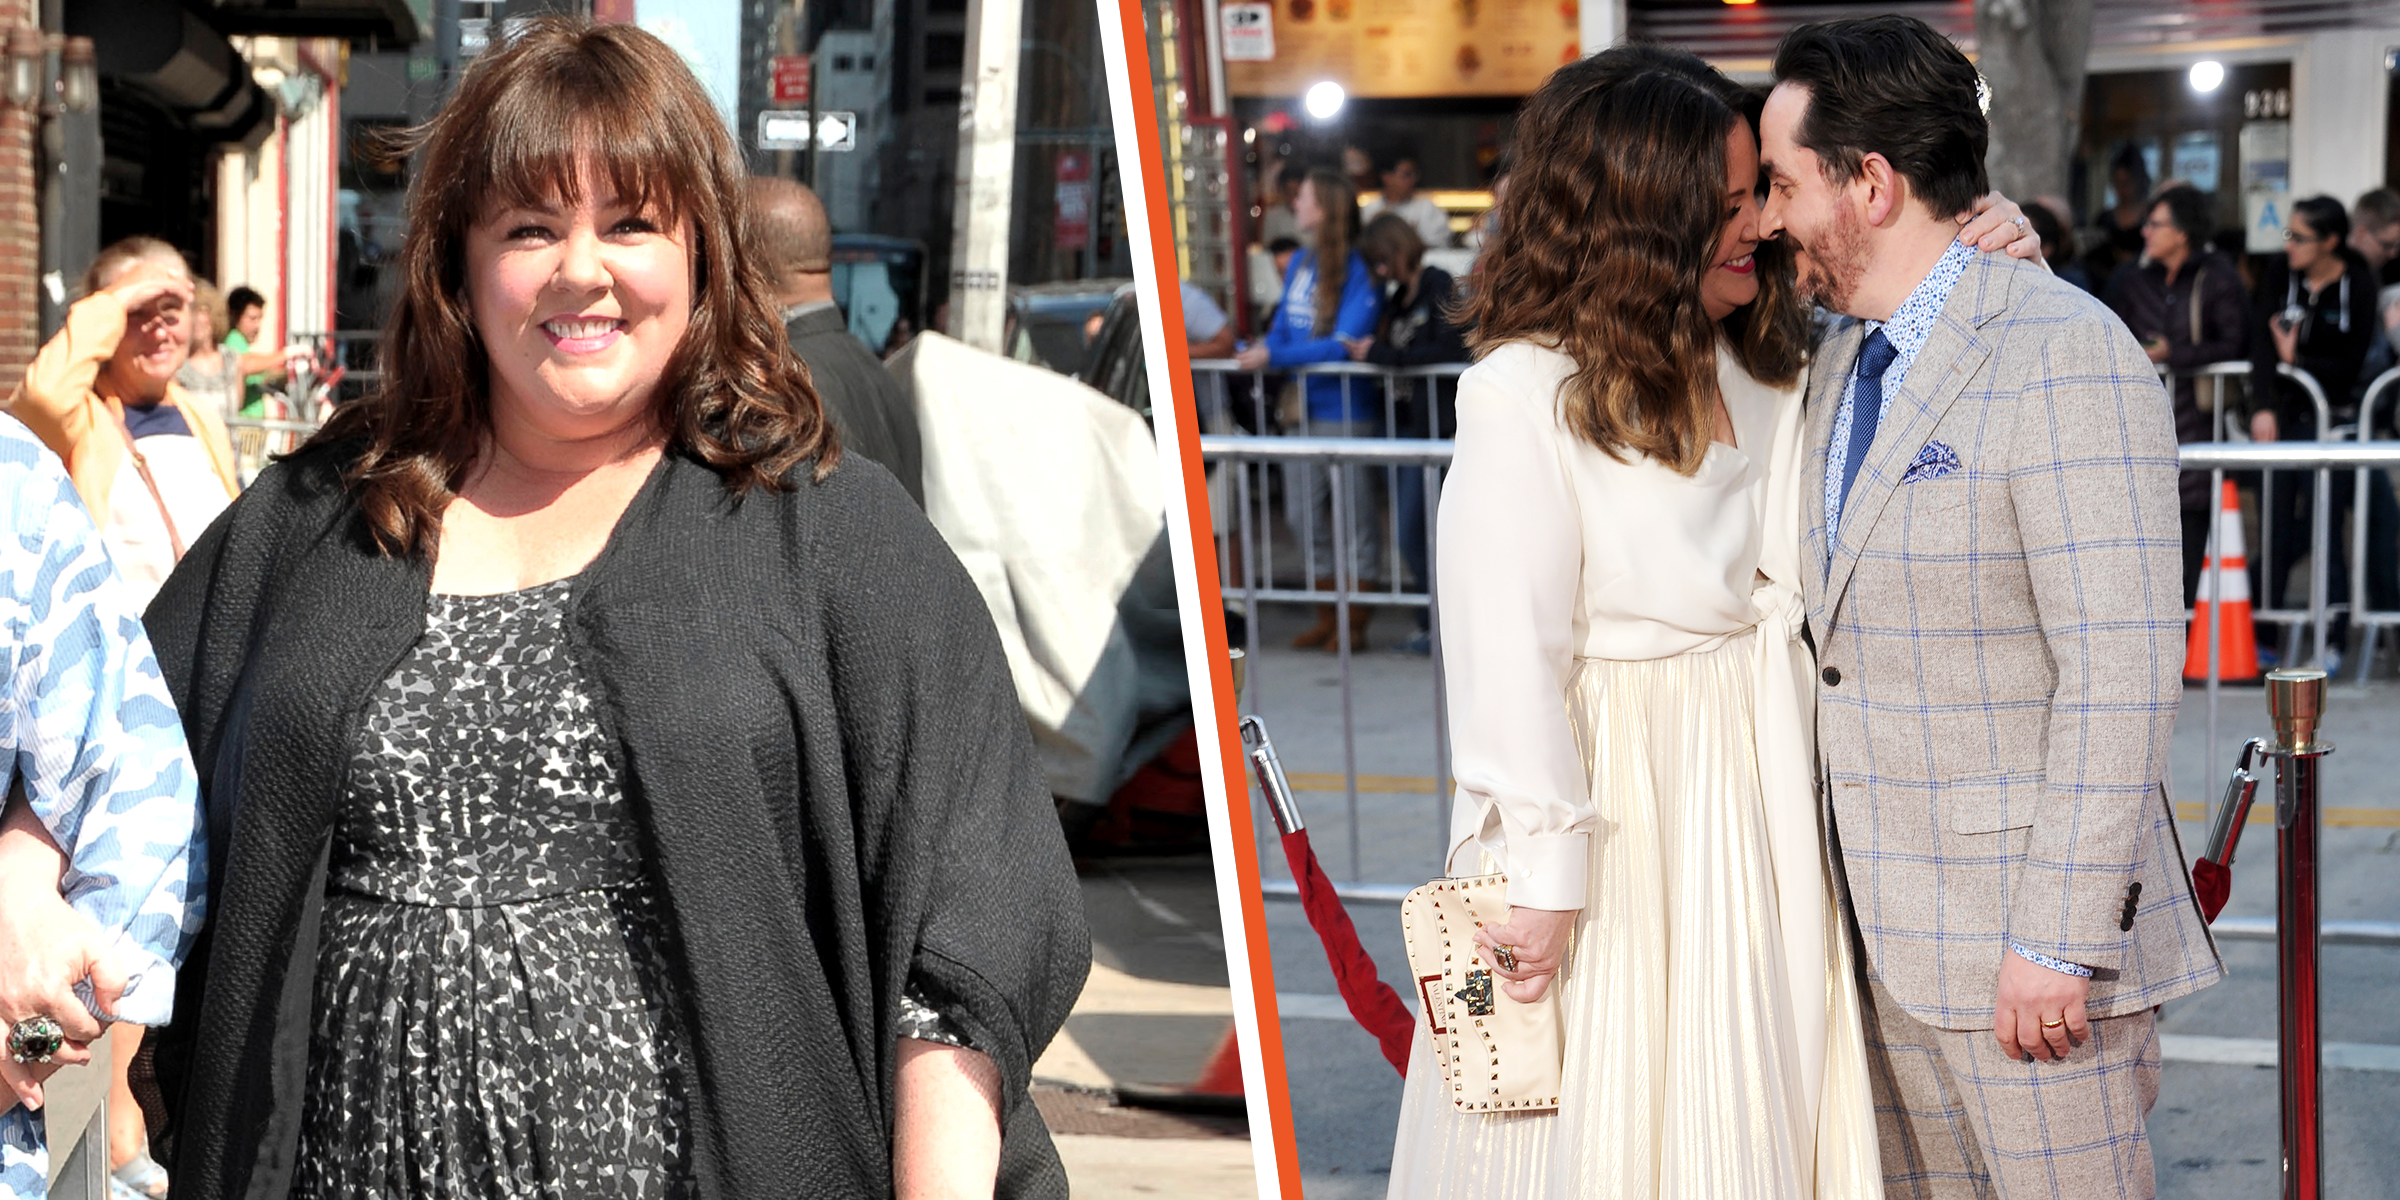 Melissa McCarthy | Melissa McCarthy and Ben Falcone | Source: Getty Images